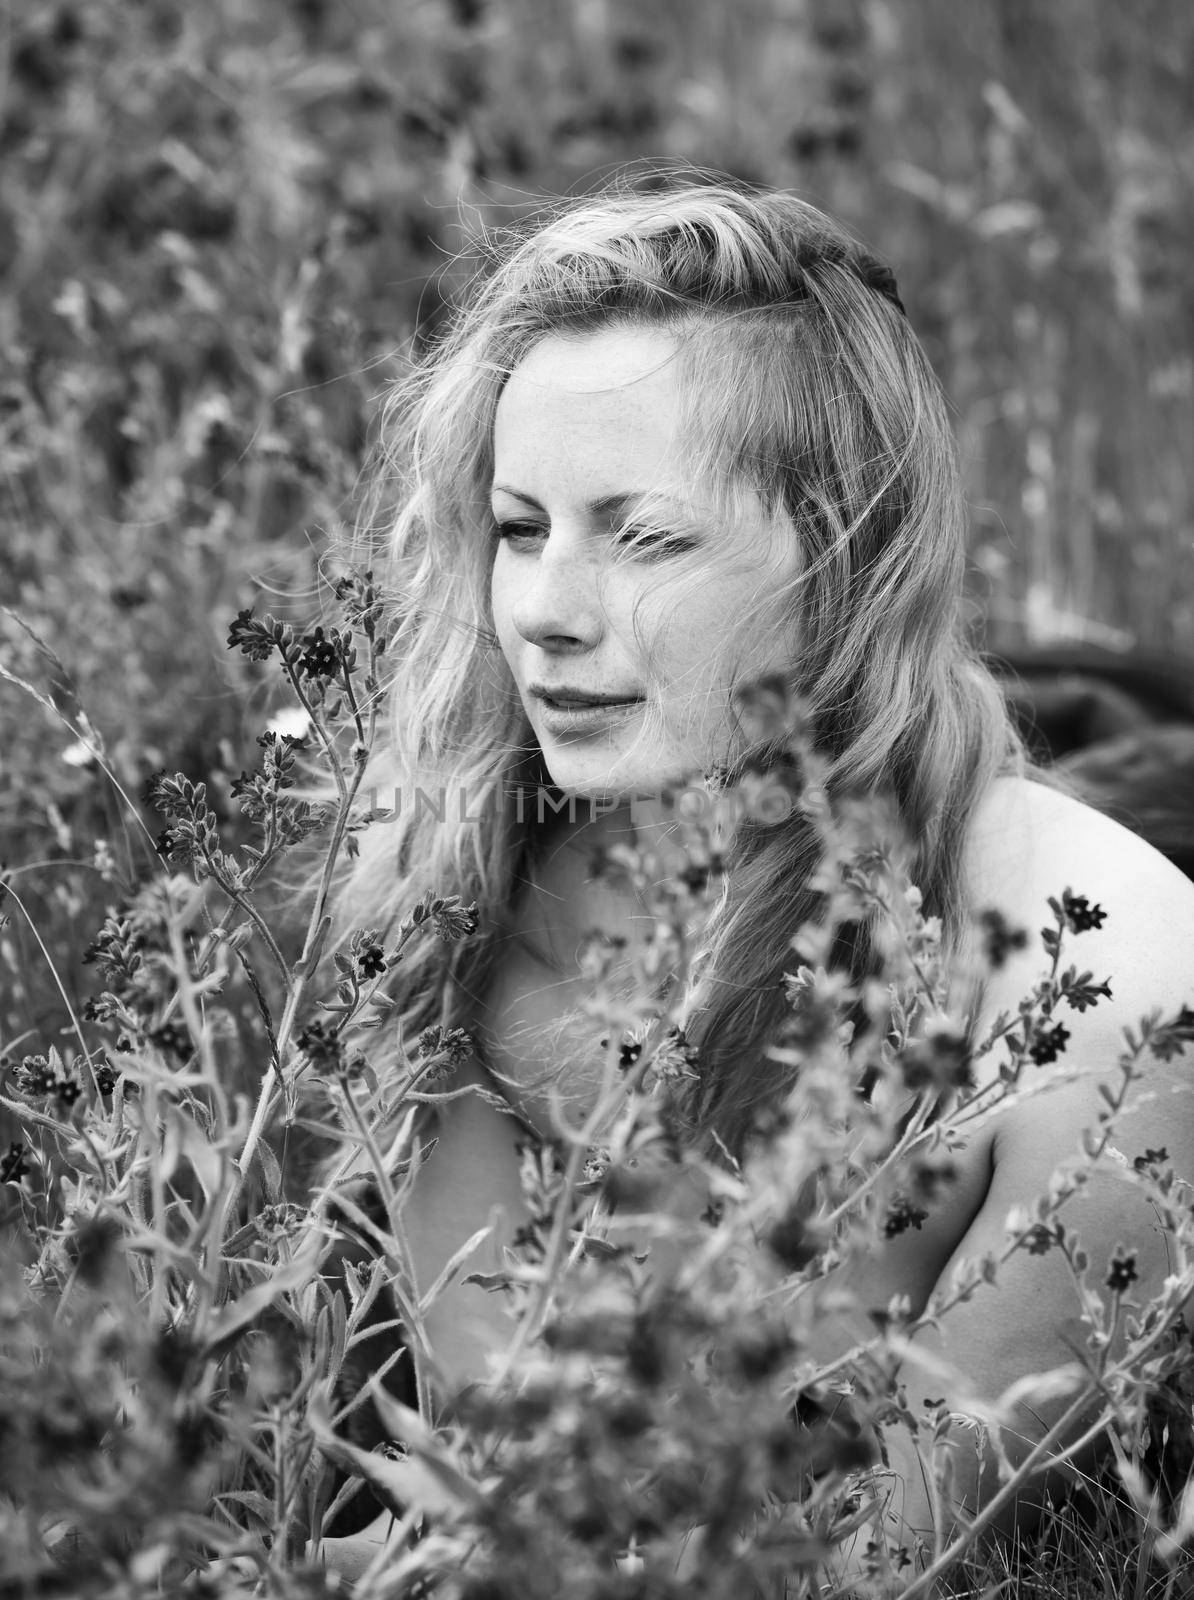 Black and white portrait of freckled woman on natural background. Young woman enjoying nature among the flowers and grass. Close up summer portrait 